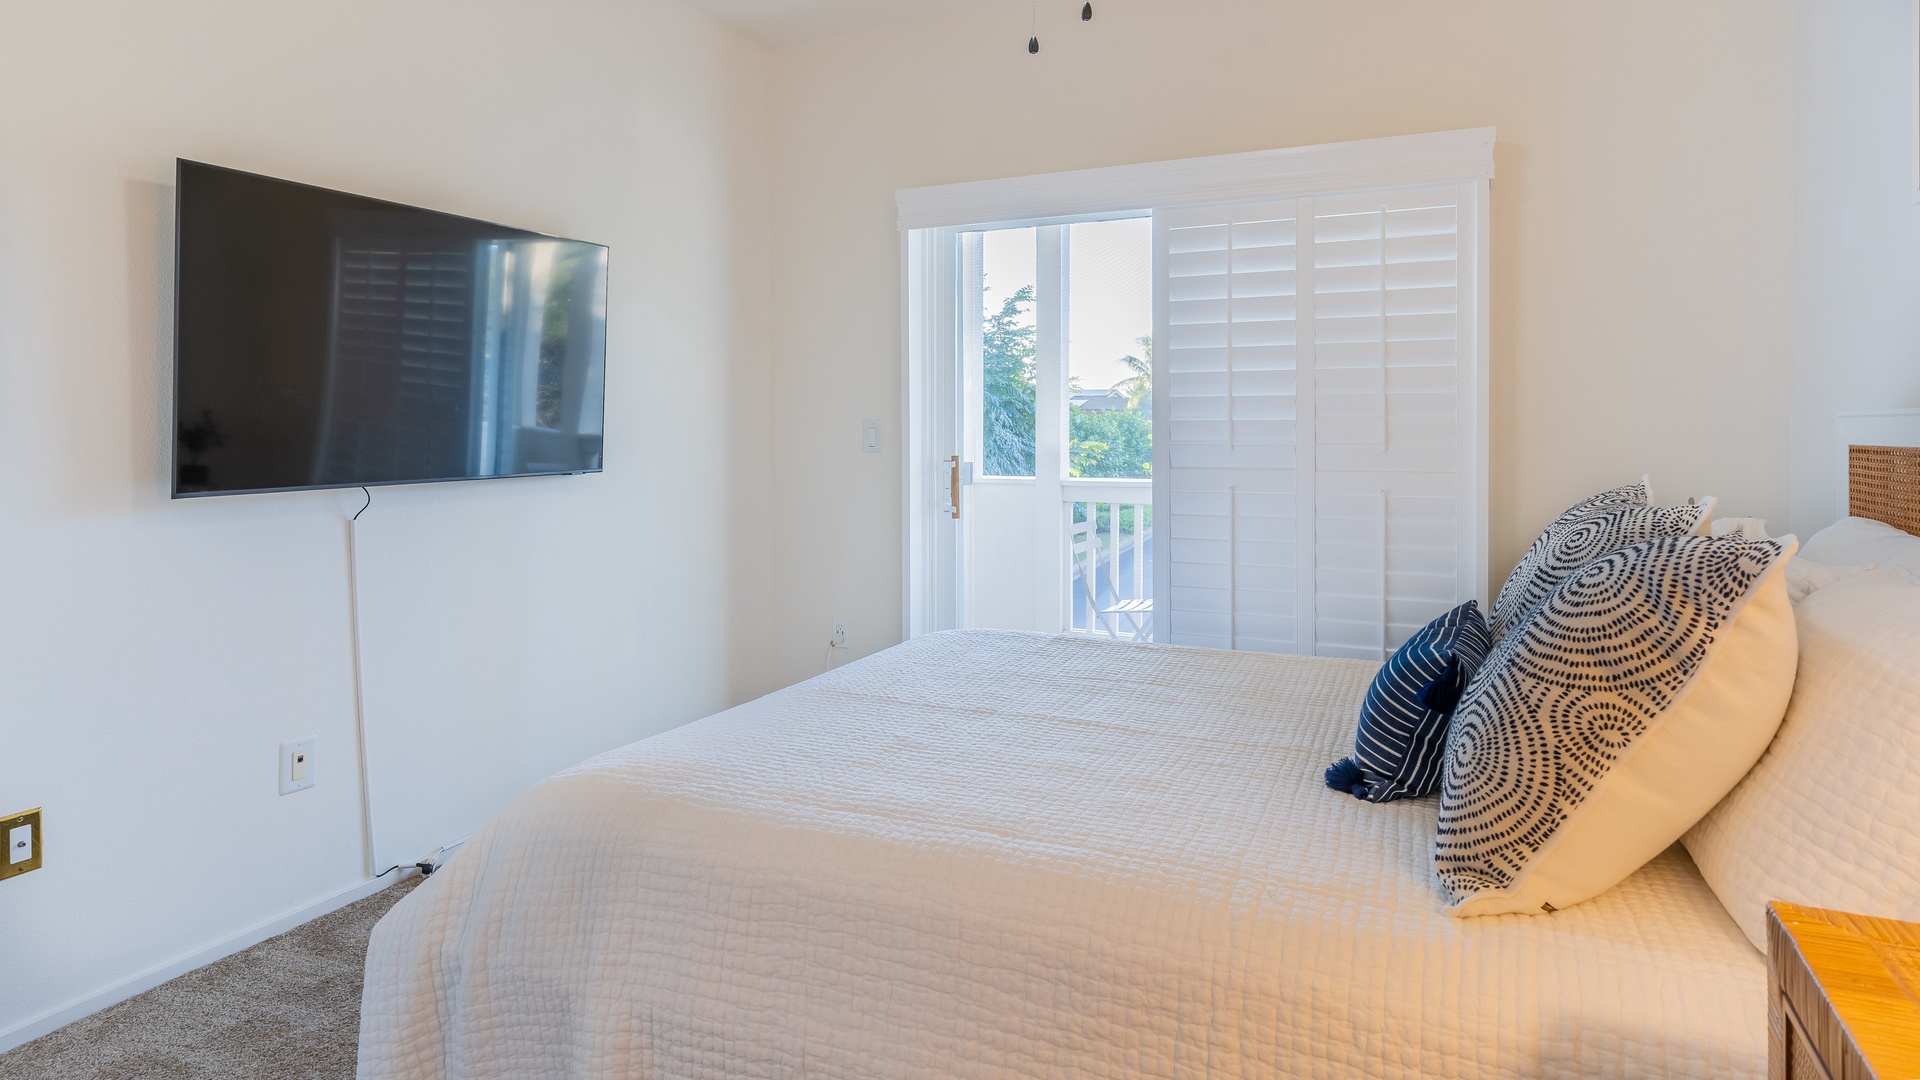 Kapolei Vacation Rentals, Coconut Plantation 1158-1 - The second guest bedroom featuring a TV and a generous amount of space.